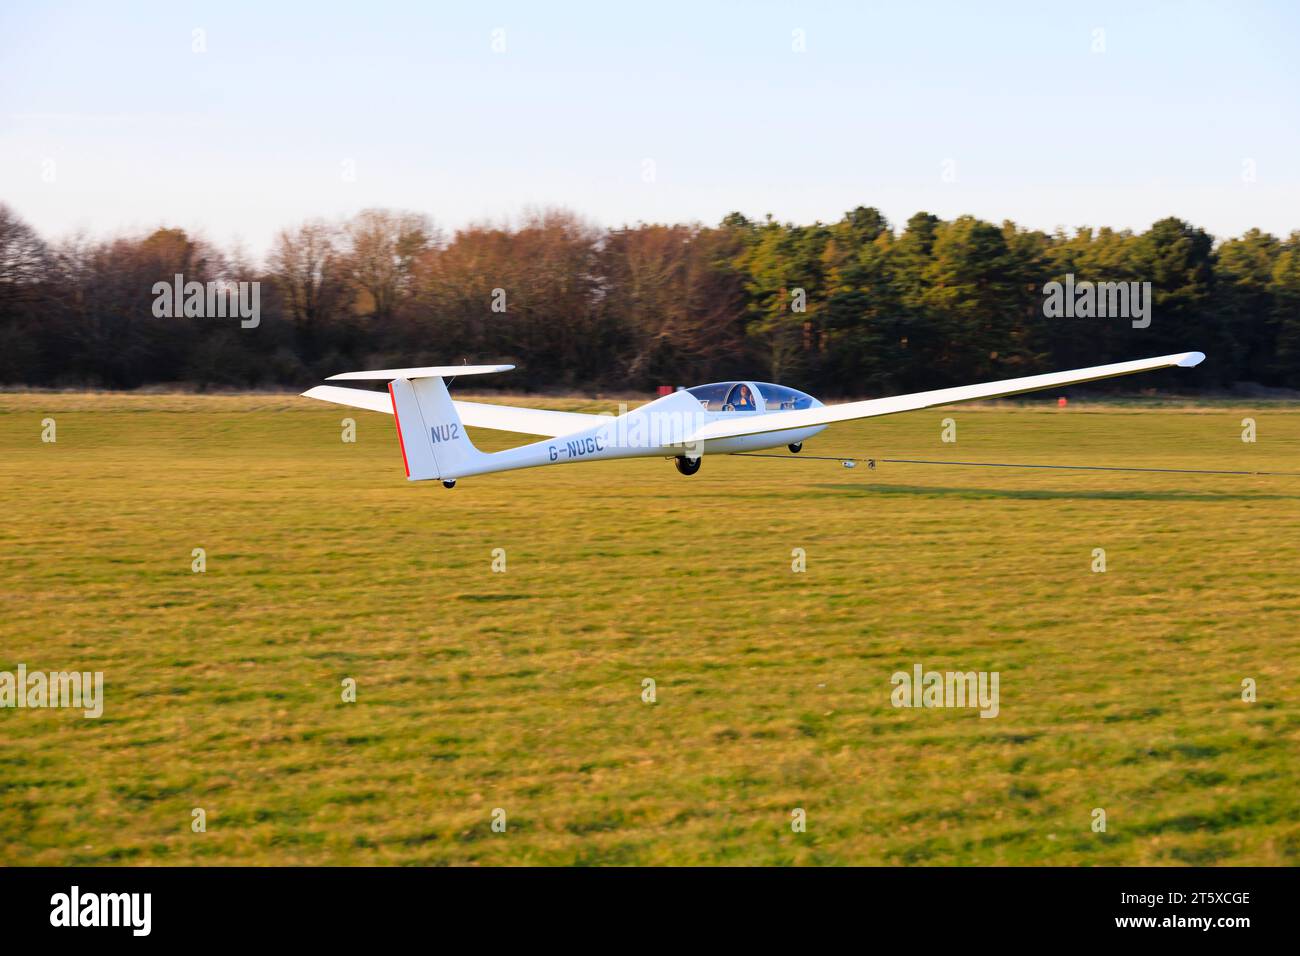 Grob 103 Acro glider of the University of Nottingham Gliding Club on winch launch take off from RAF Cranwell, Lincolnshire. Stock Photo